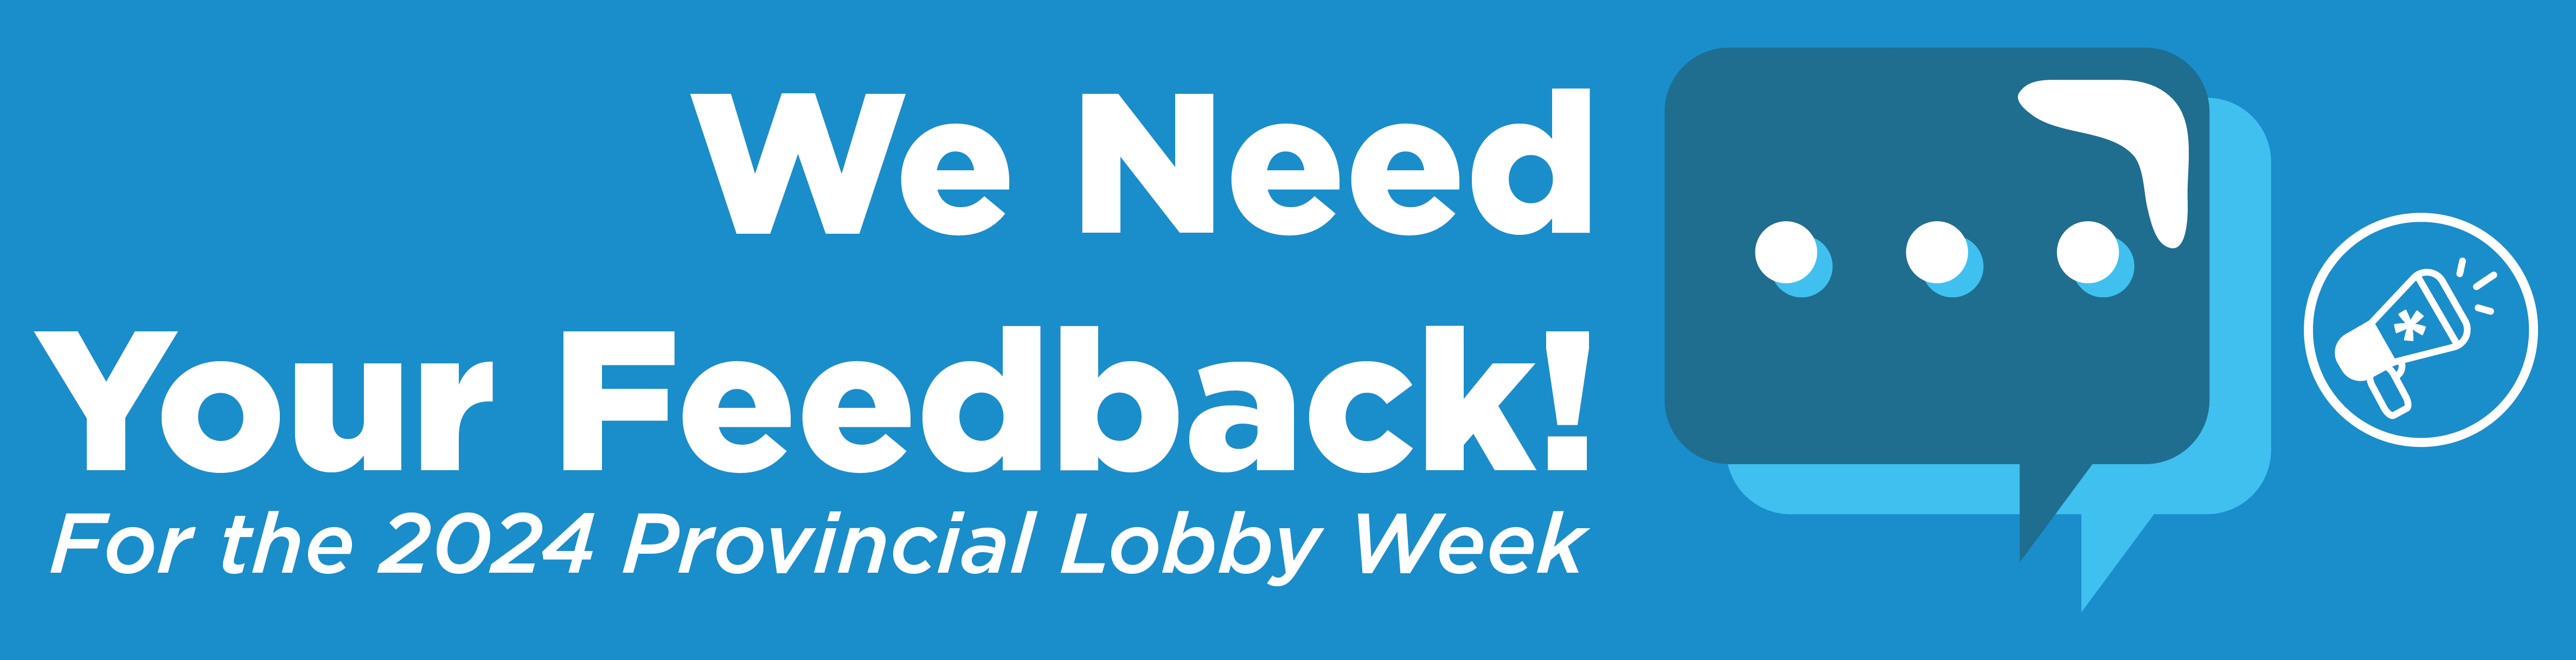 We Need Your Feedback! For the 2024 Provincial Lobby Week